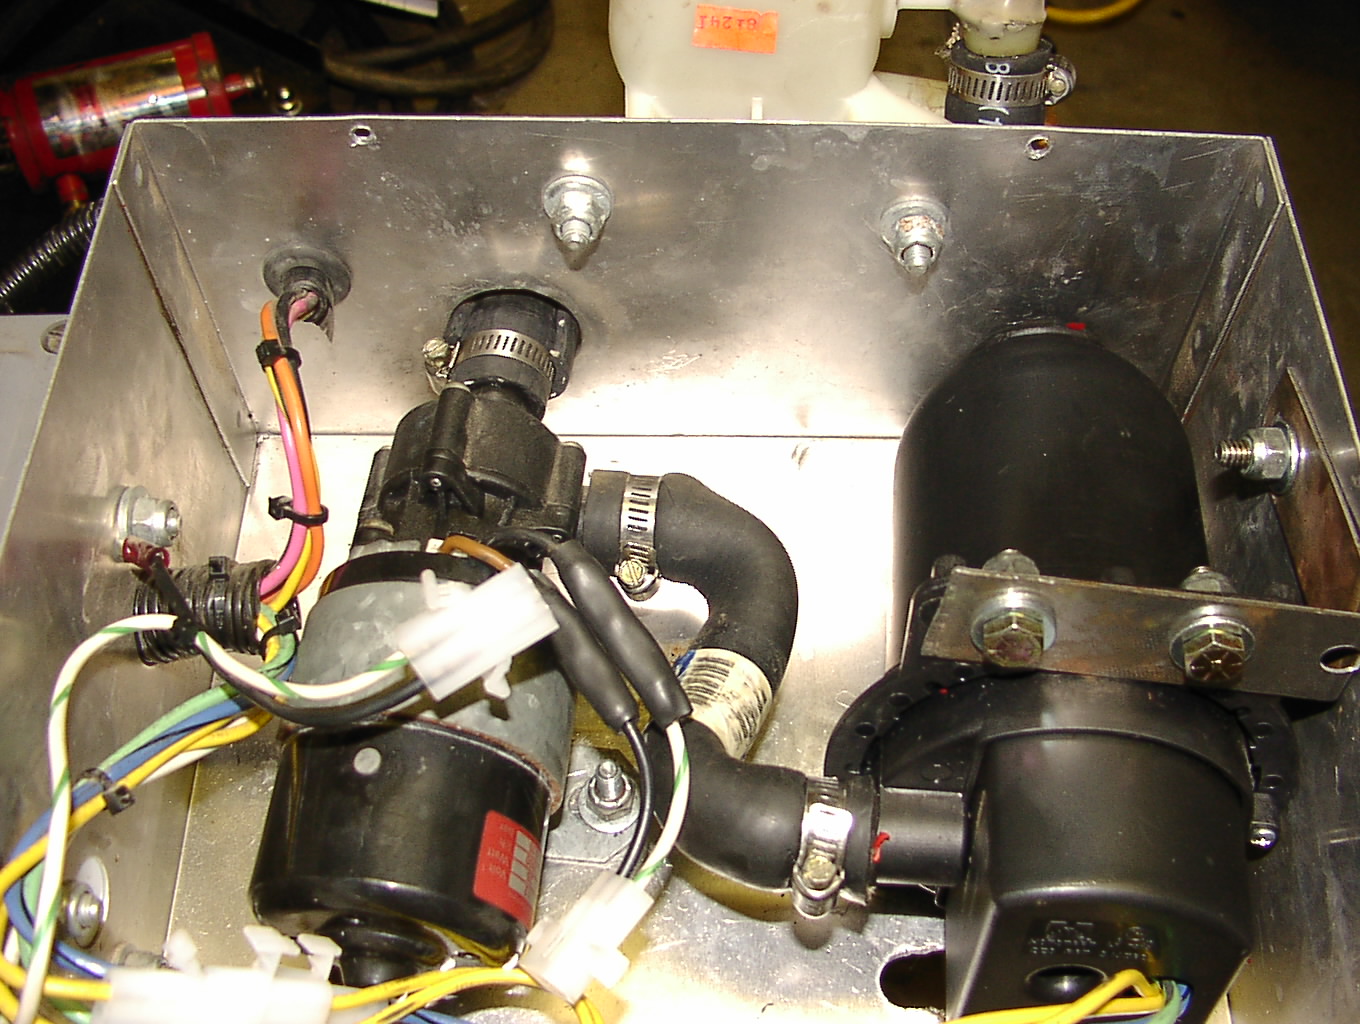 Pump and Hostart closeup. Note simple bracket to hold Hotstart in place.